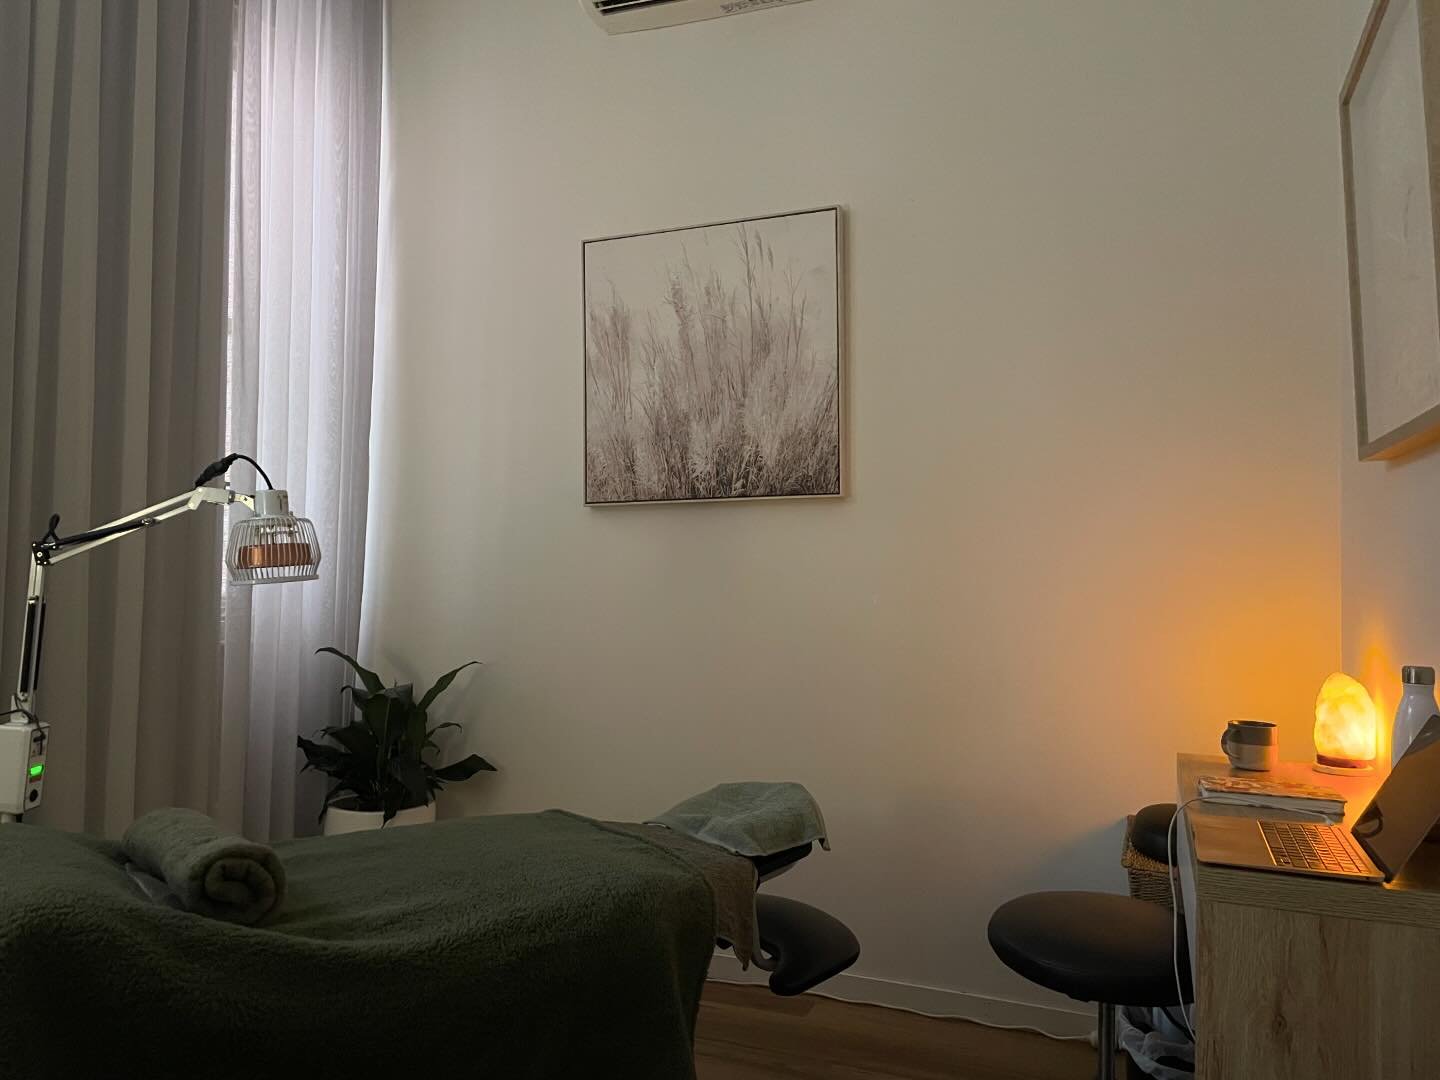 Today&rsquo;s rainy Melbourne day makes the rooms here so much more cozy and calming.

The perfect place to unwind while healing your body.

Monday and Wednesday 11am - 8pm

To book, follow the link in the bio 

See you soon 💚